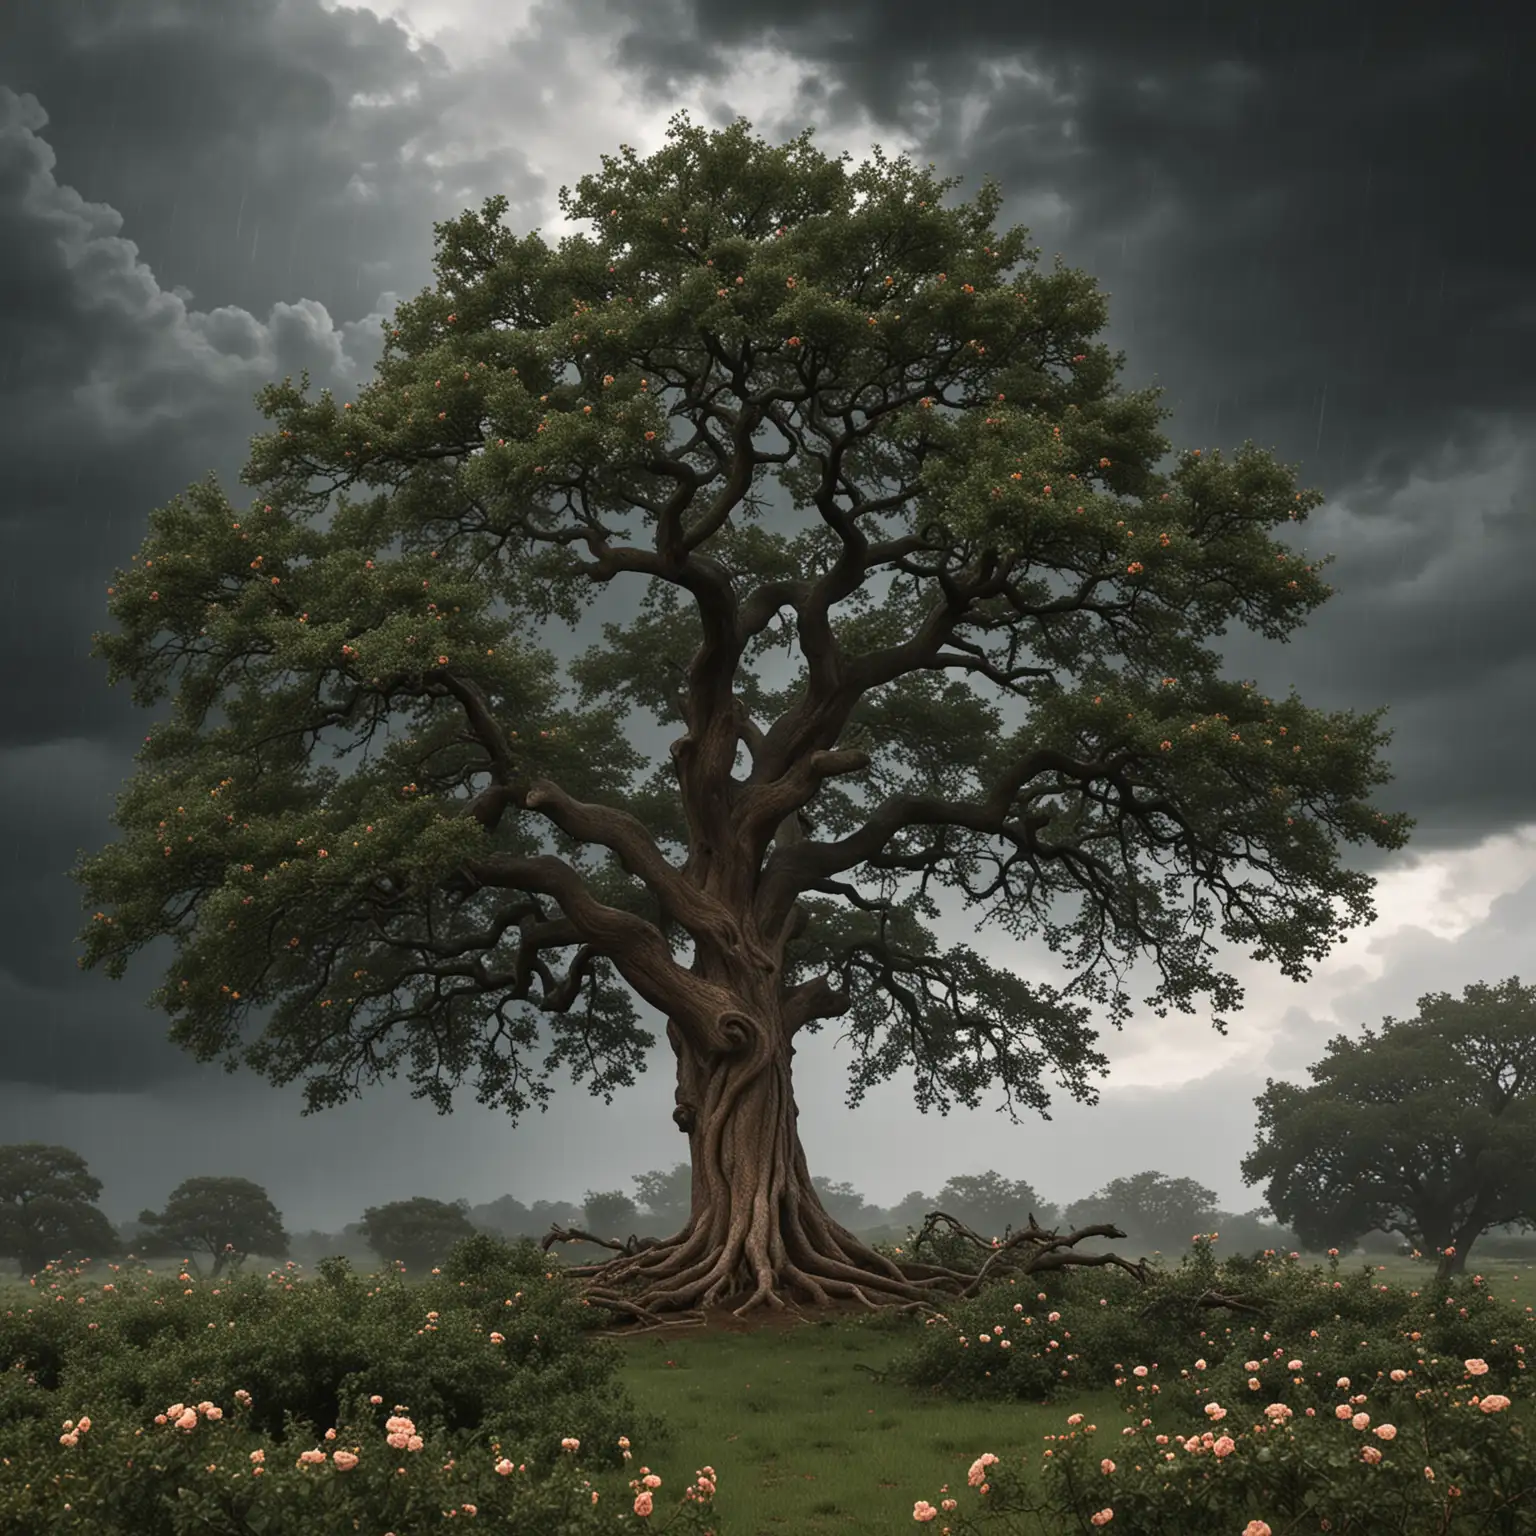 a realistic image of an oak tree standing steadfast amidst a severe ominous storm blwoing around. The tree should convey strength and resilience, with its branches extending outward. Nearby, a rose bush blooms vibrantly, defying the tumultuous weather. The storm should be depicted with dark clouds, swirling winds, and rain pouring down. Despite the chaos, the oak tree and the rose bush remain unwavering symbols of endurance and beauty. eye level perspective. 